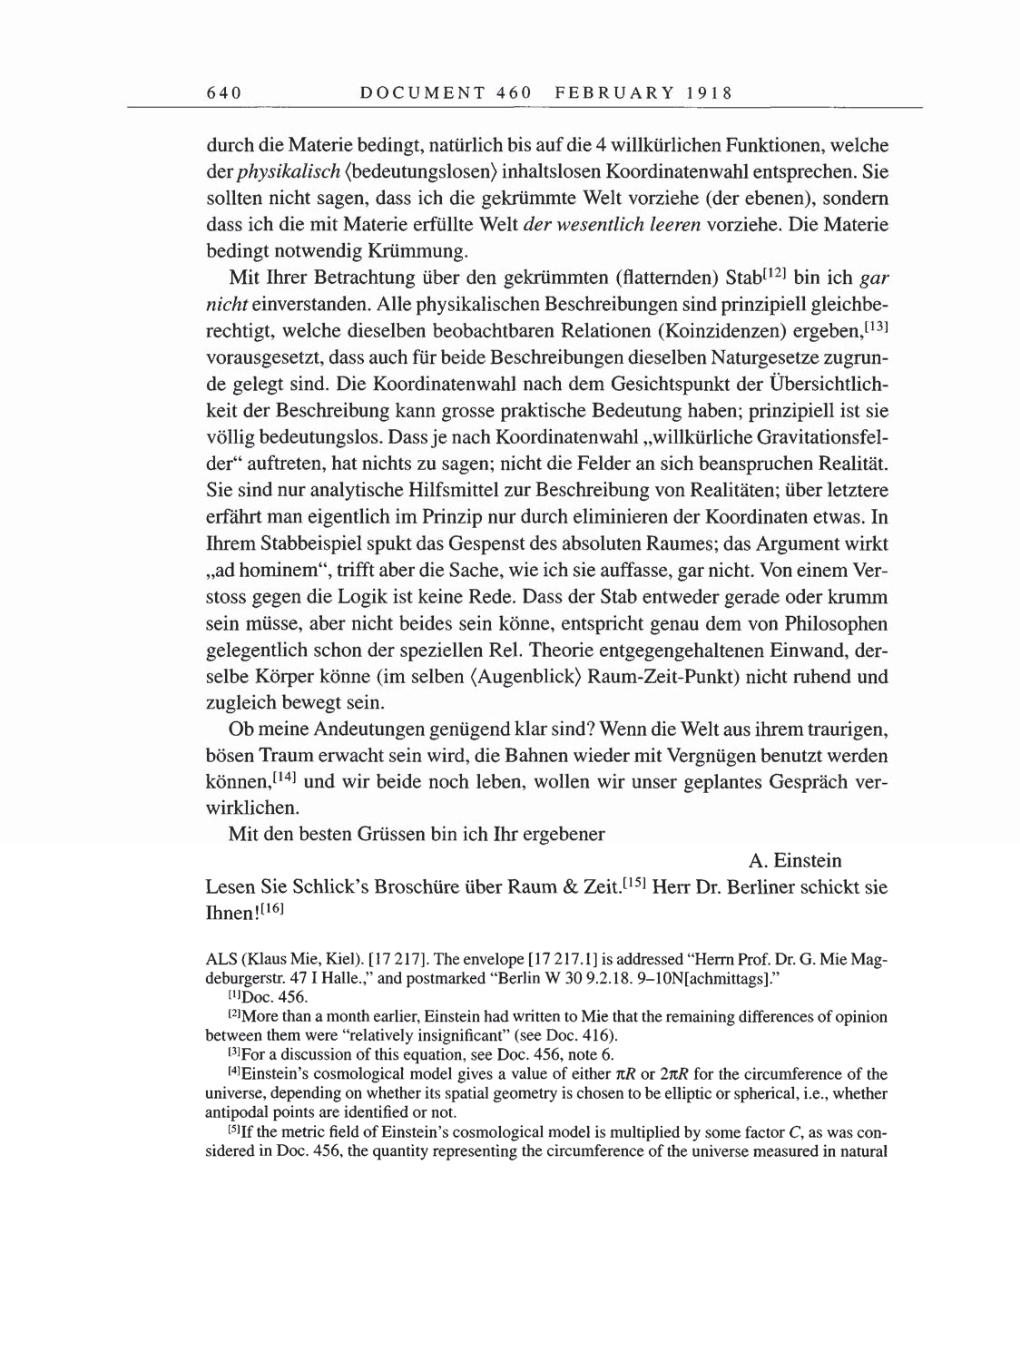 Volume 8, Part B: The Berlin Years: Correspondence 1918 page 640